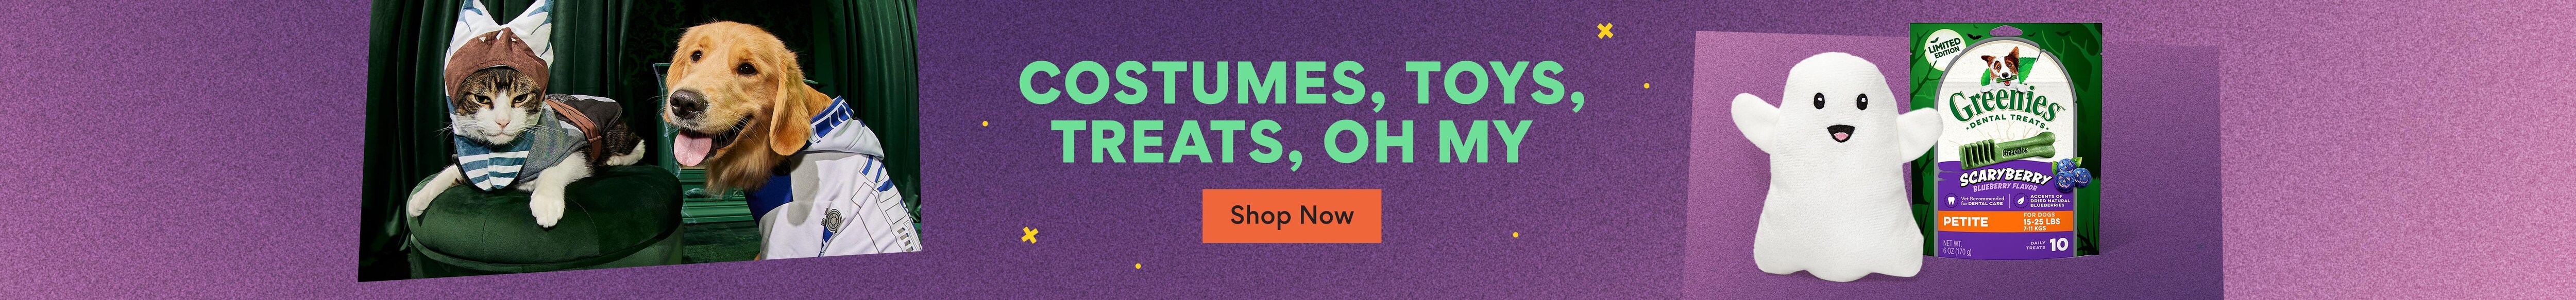 Costumes, toys, treats, oh my. Shop Now.